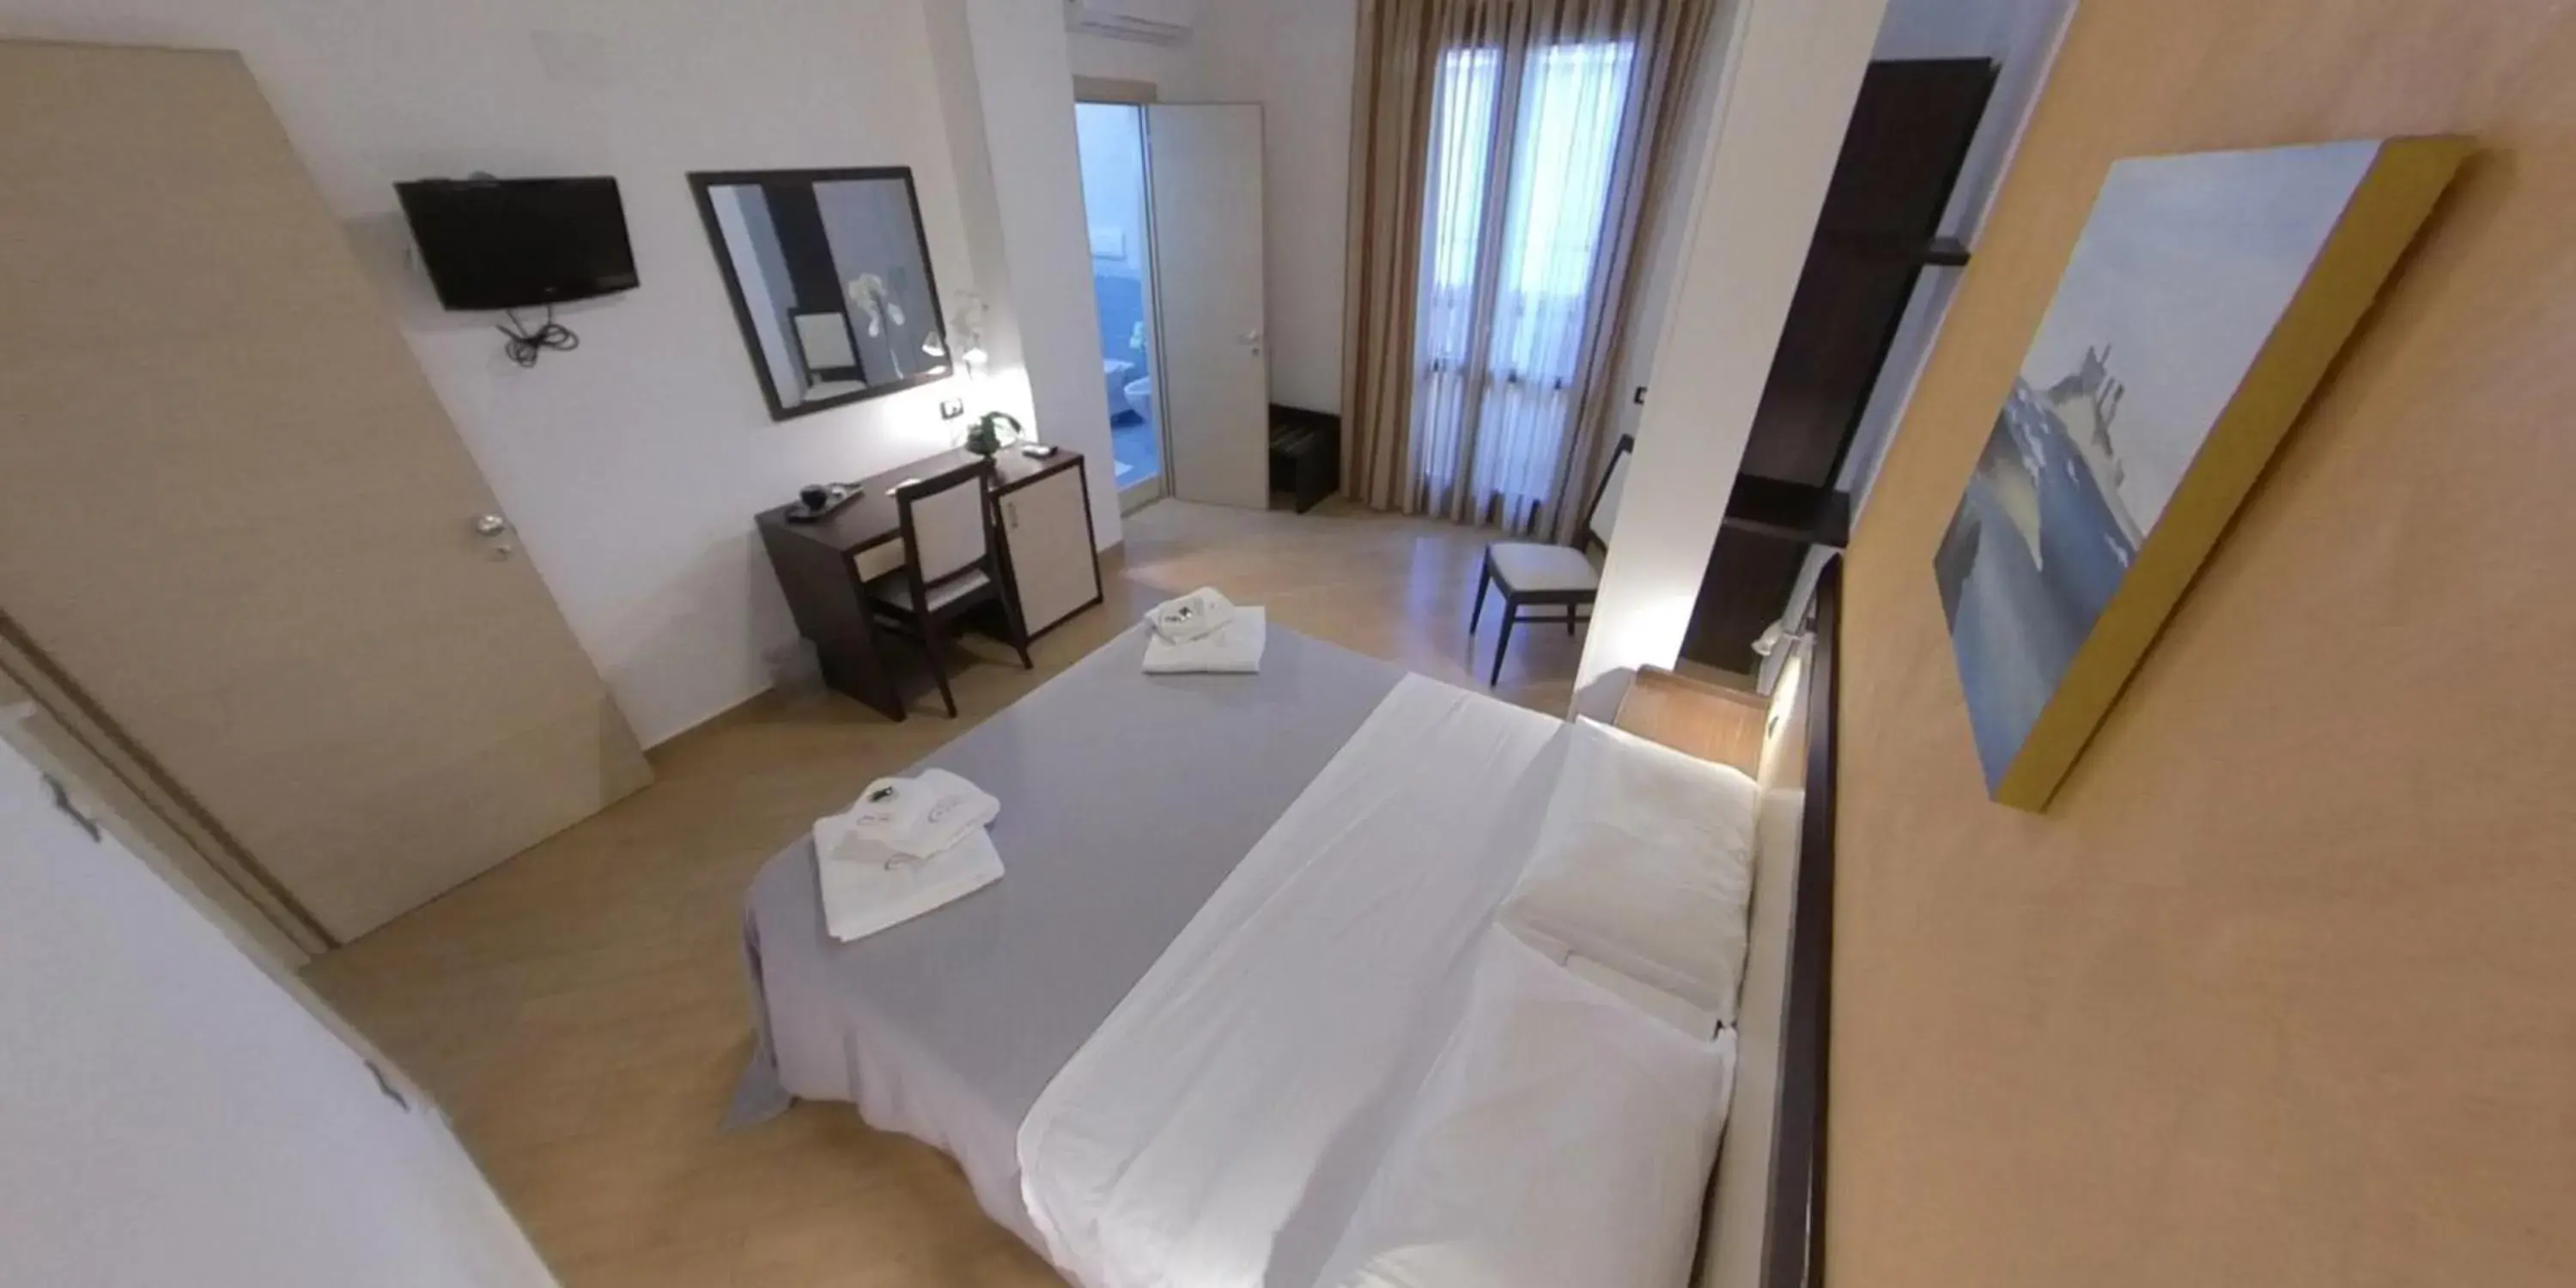 Bed in Albergo Perseo